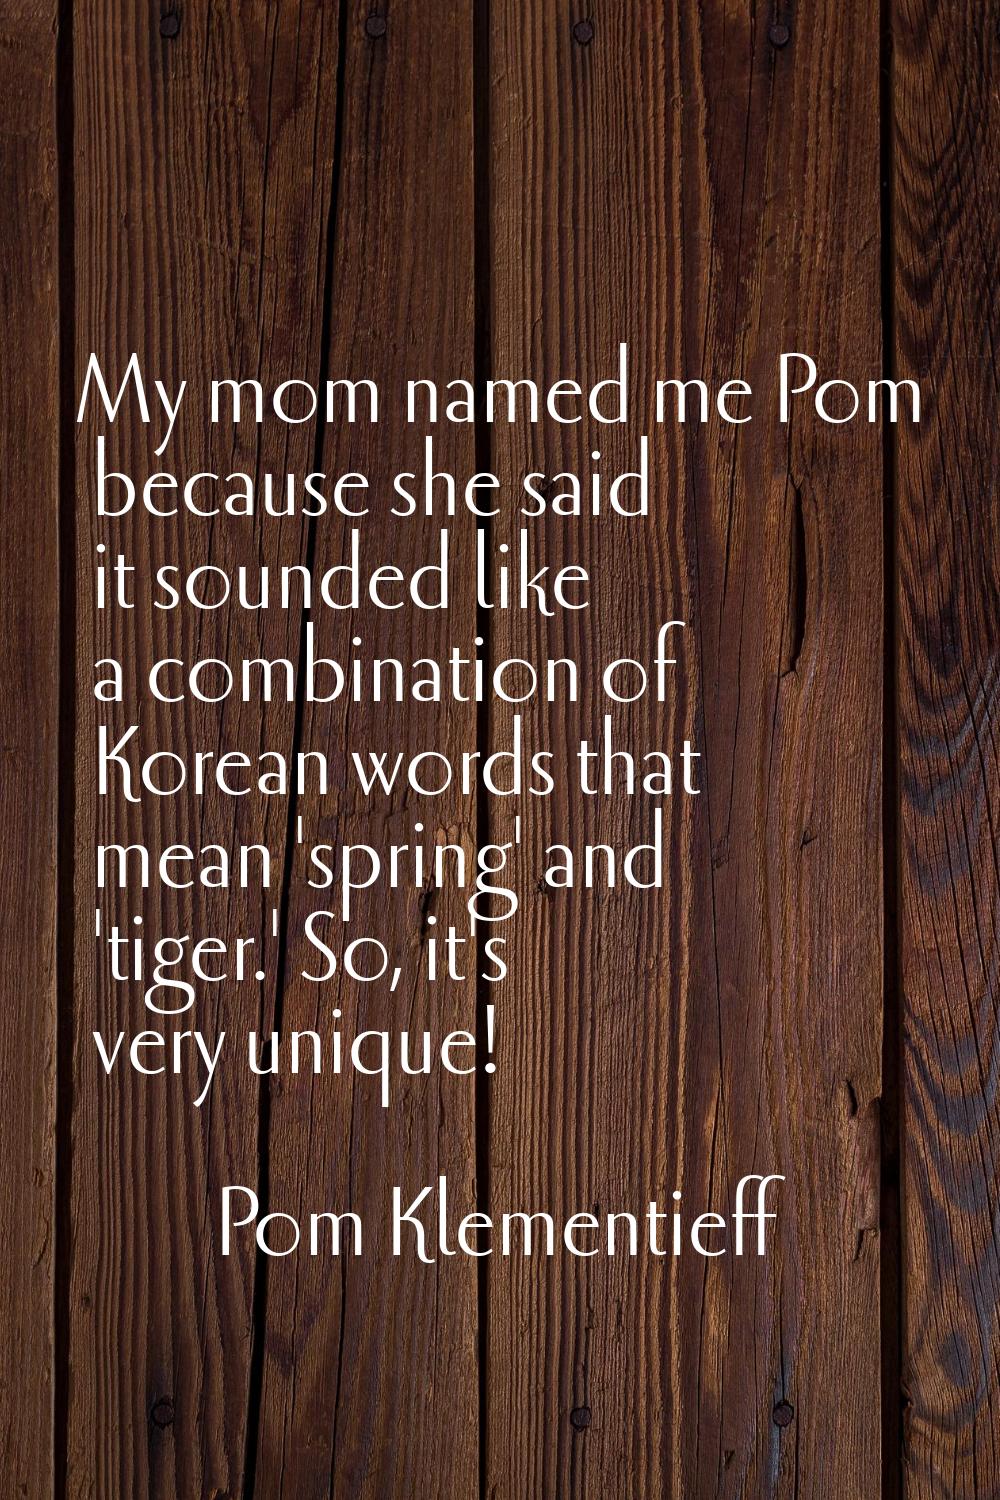 My mom named me Pom because she said it sounded like a combination of Korean words that mean 'sprin